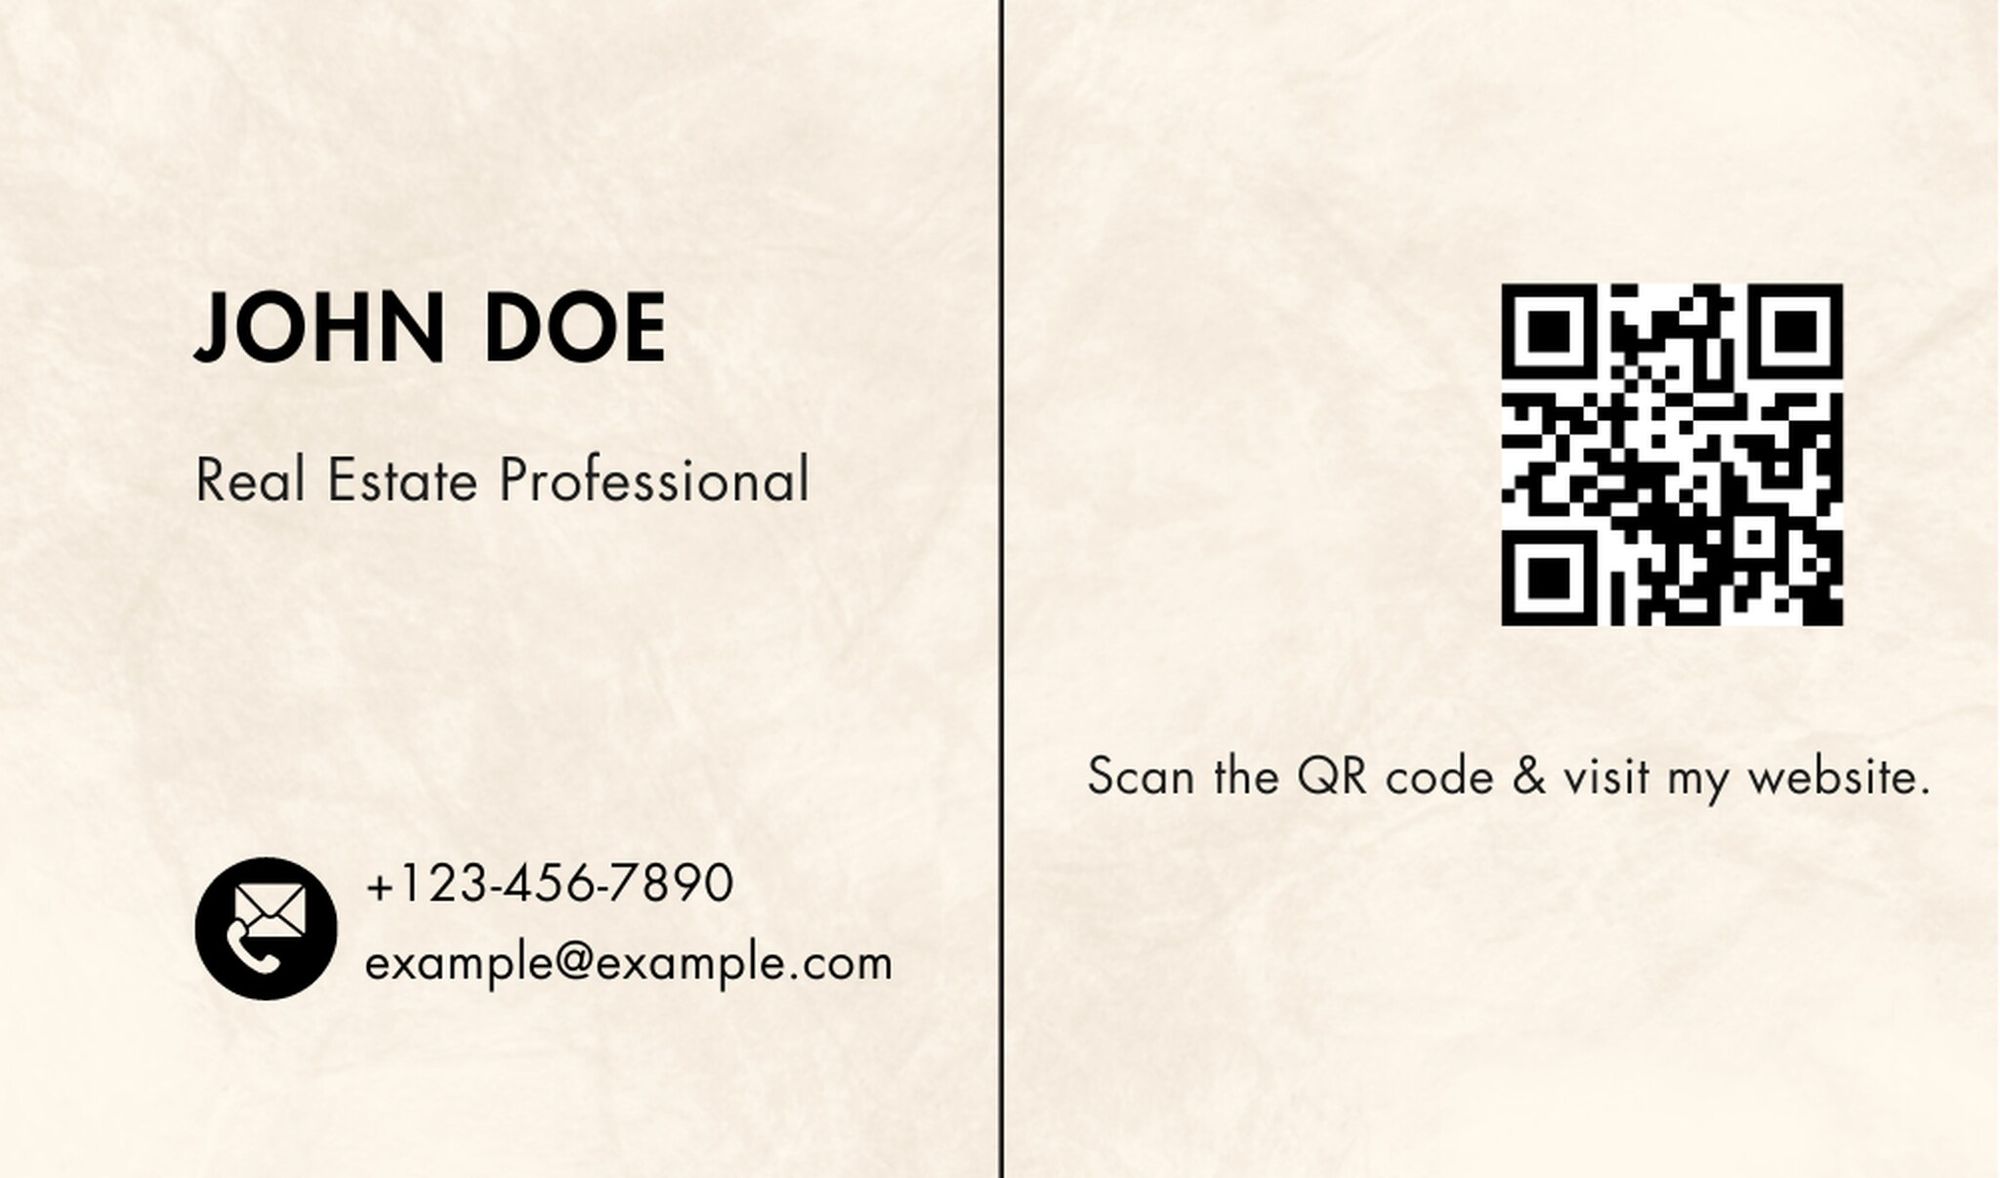 Minimal real estate business card template with QR code and contact part